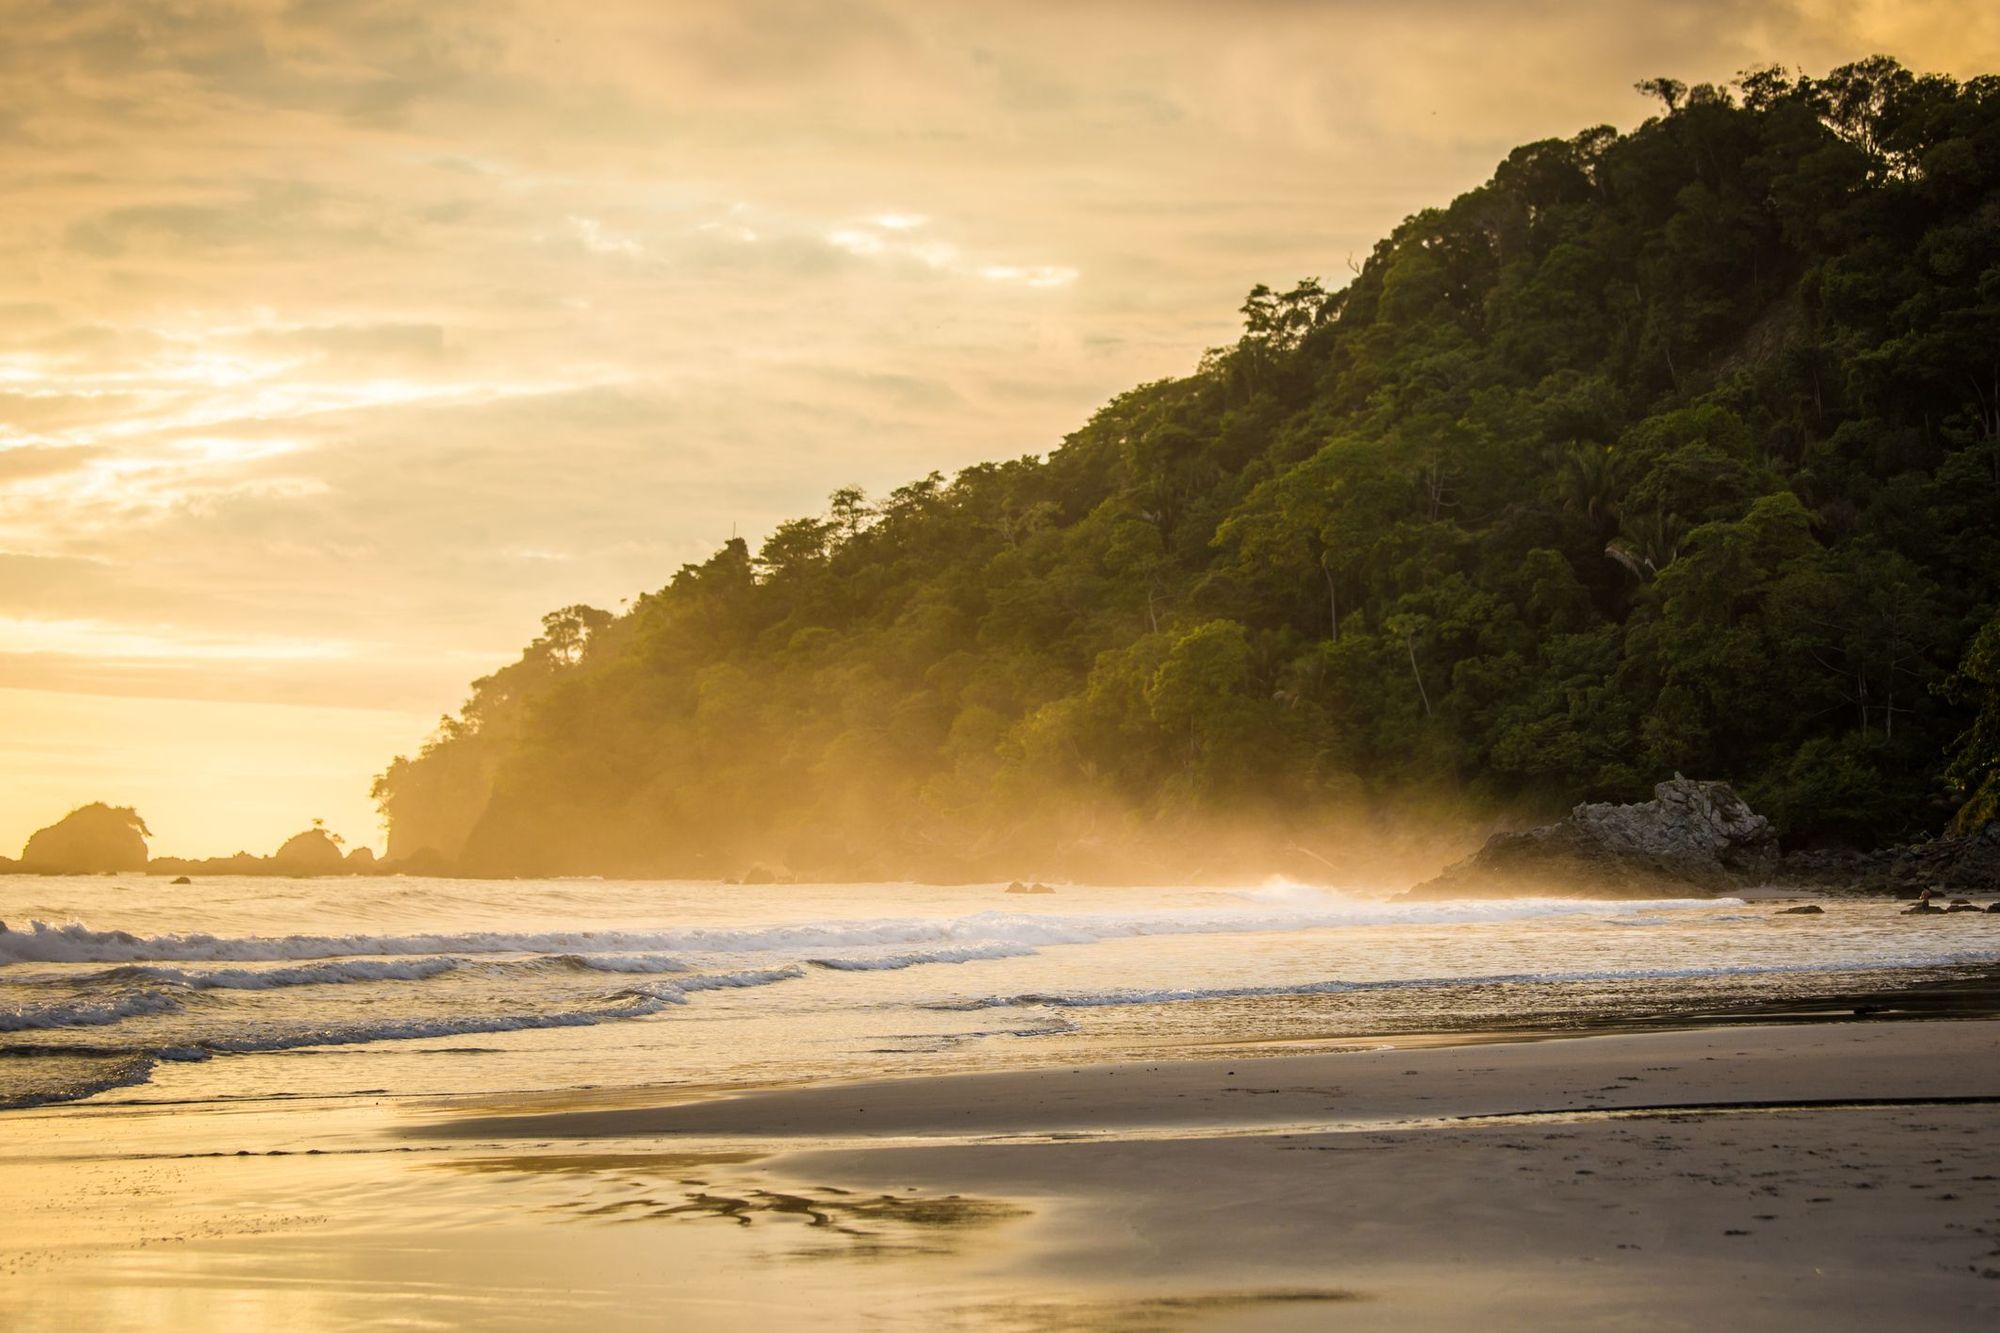 A deserted beach in Manuel Antonio National Park, Costa Rica, at sunset.